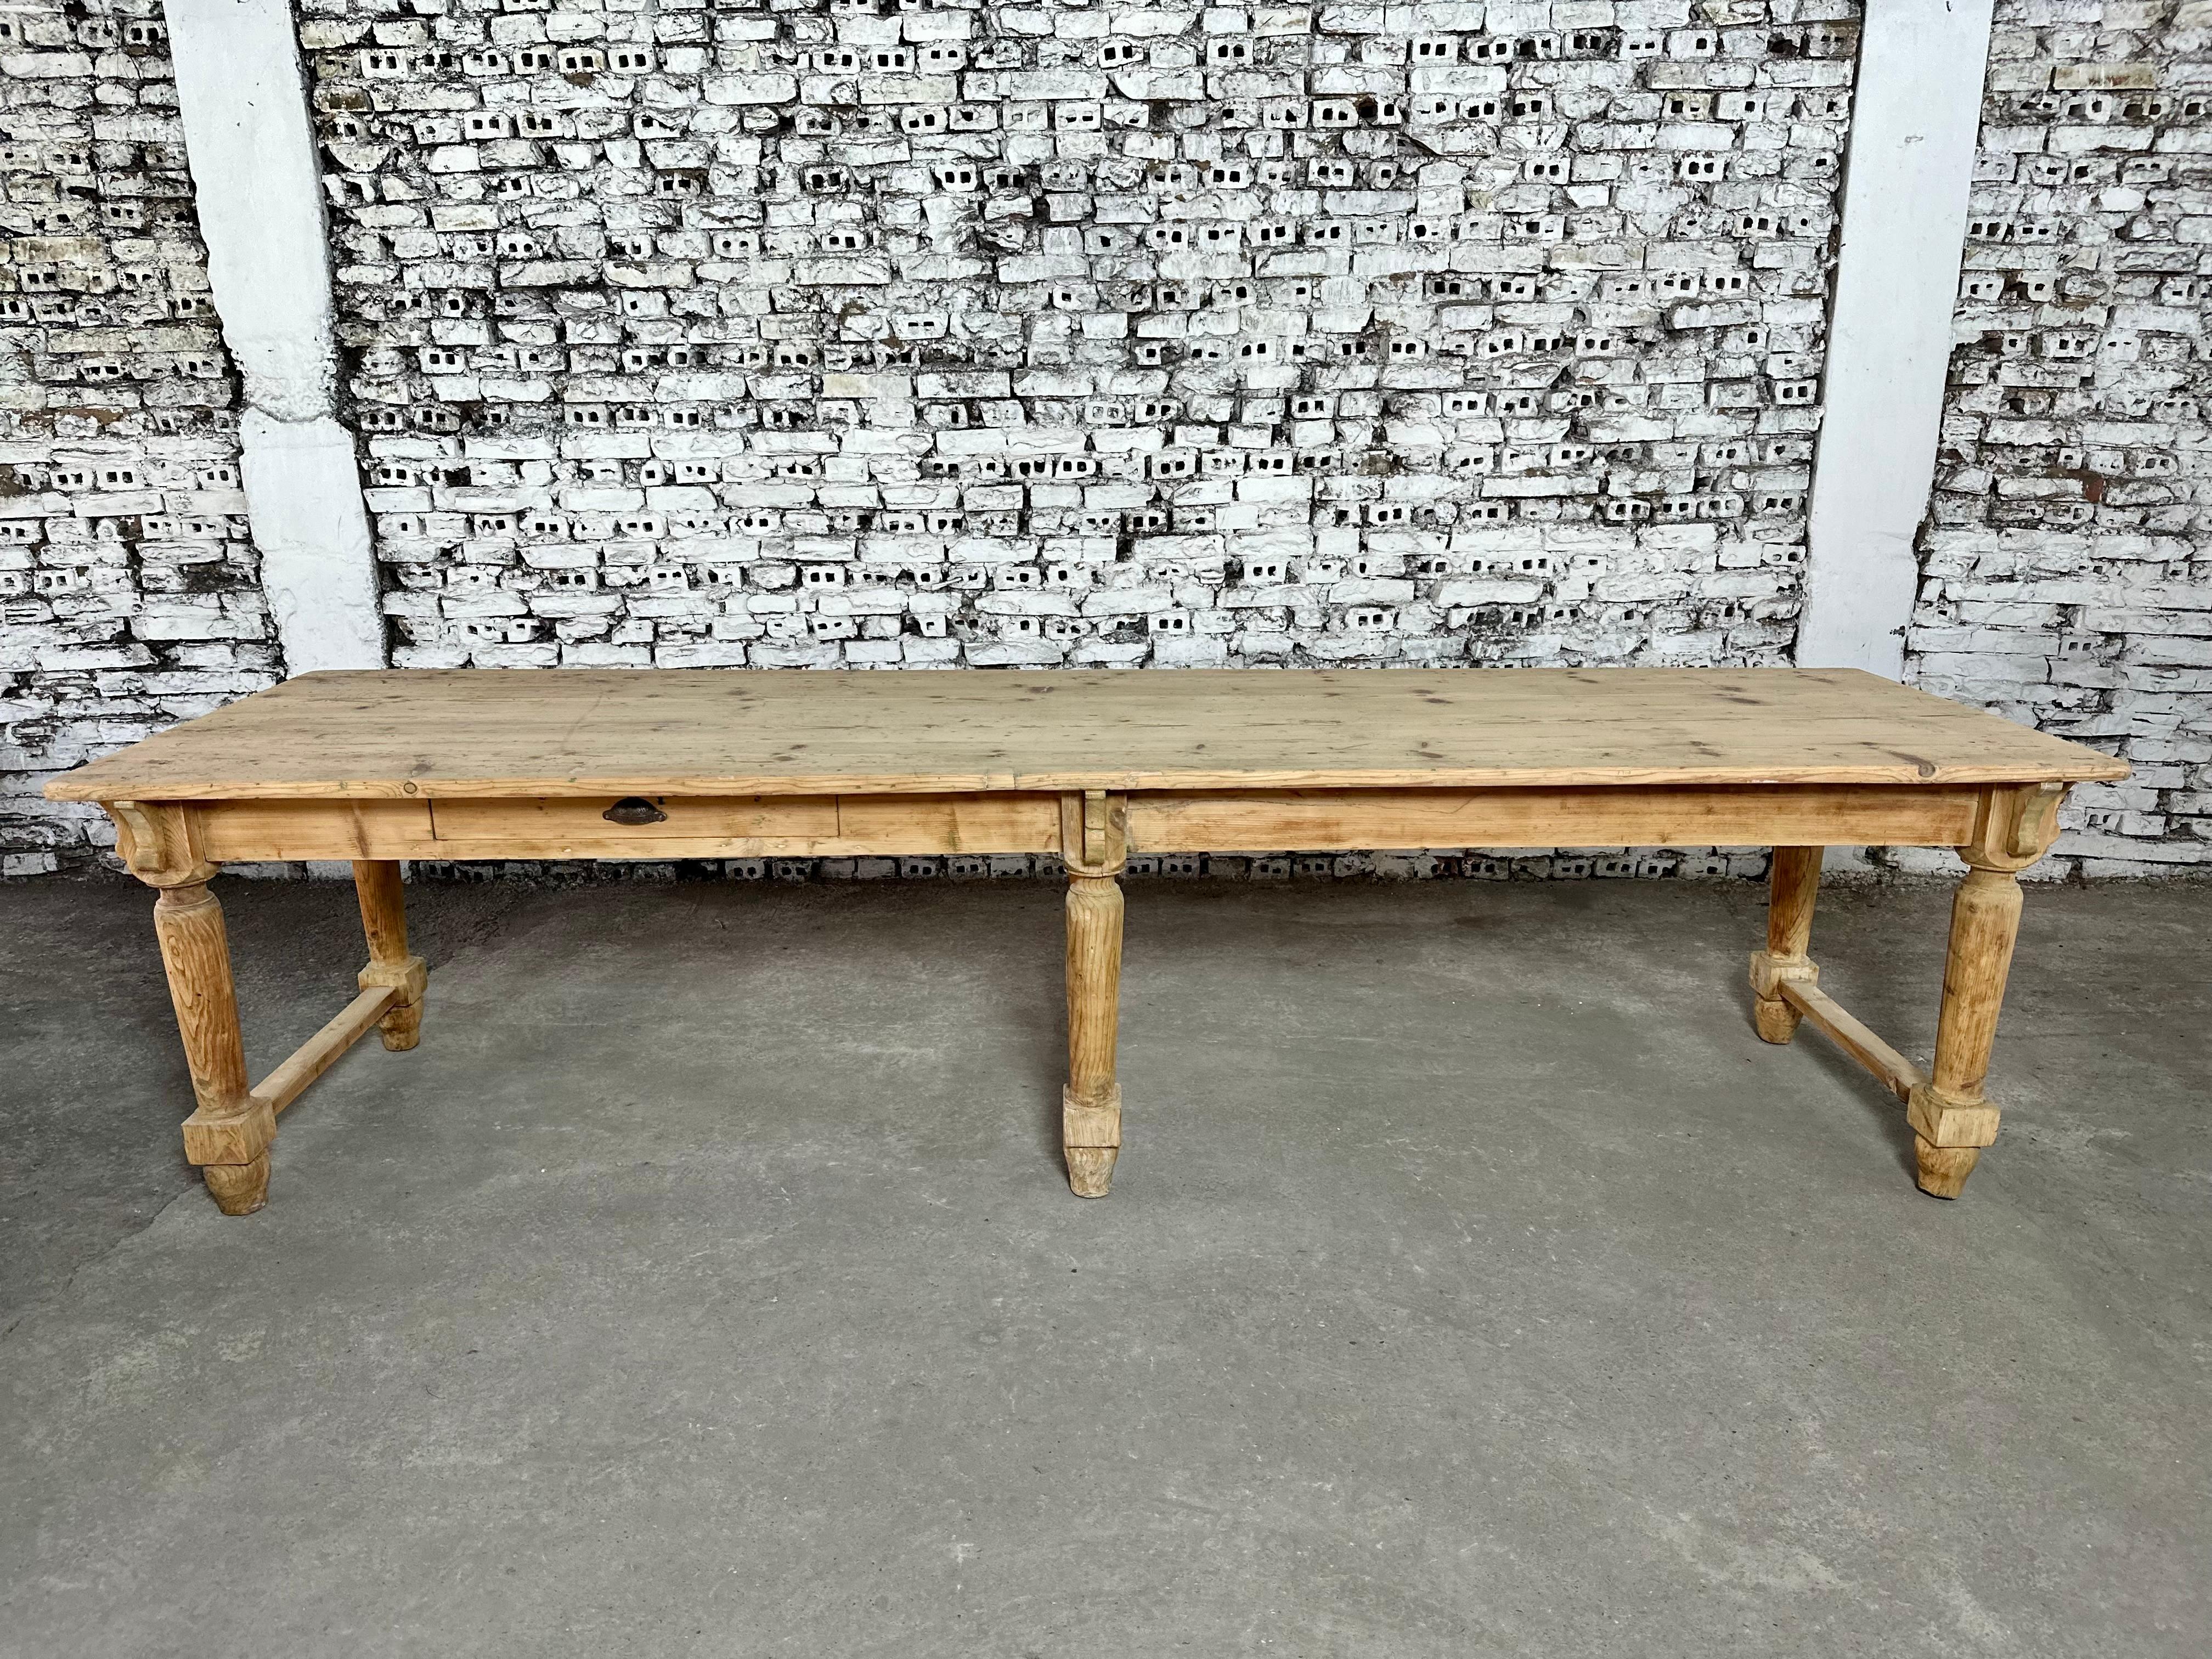 Rustic Monumental Antique Italian Farmhouse Pine Dining Table 3.5m For Sale